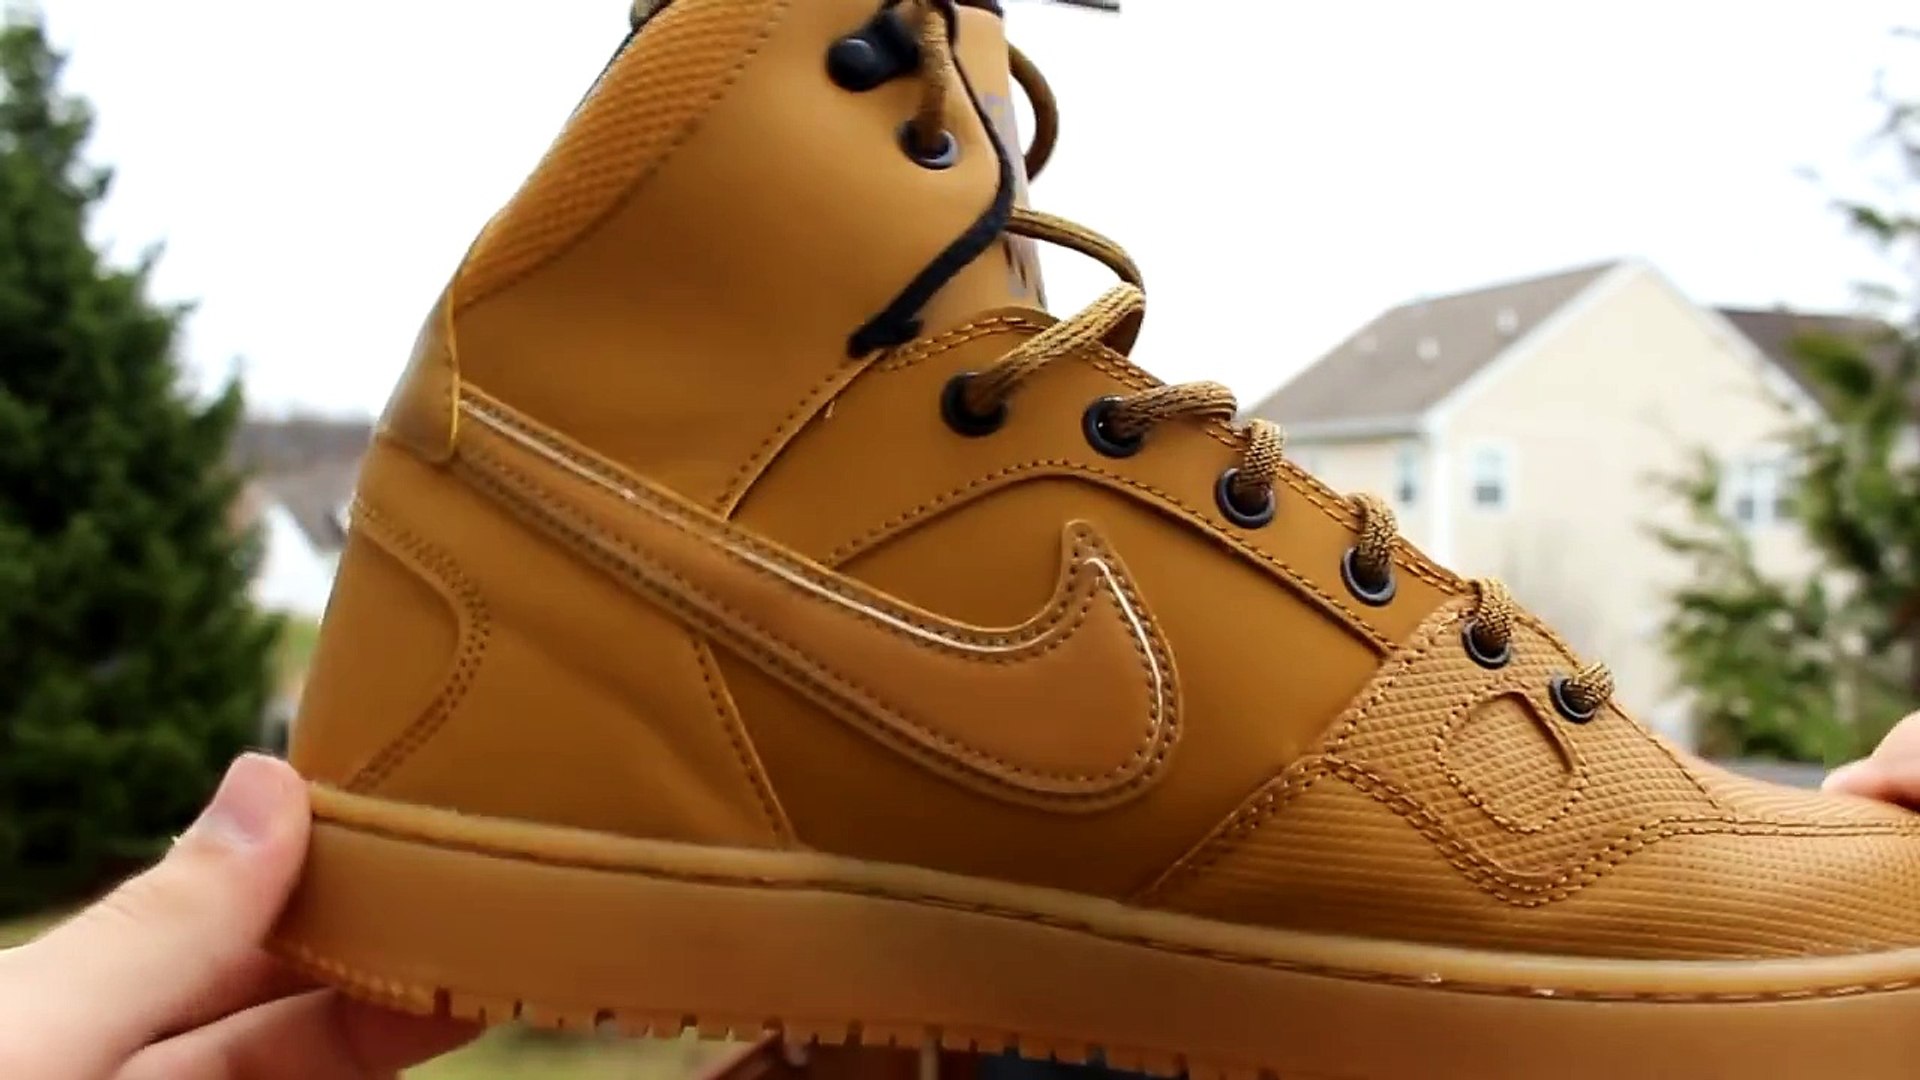 NIKE SON OF FORCE (WINTER) REVIEW! - video Dailymotion